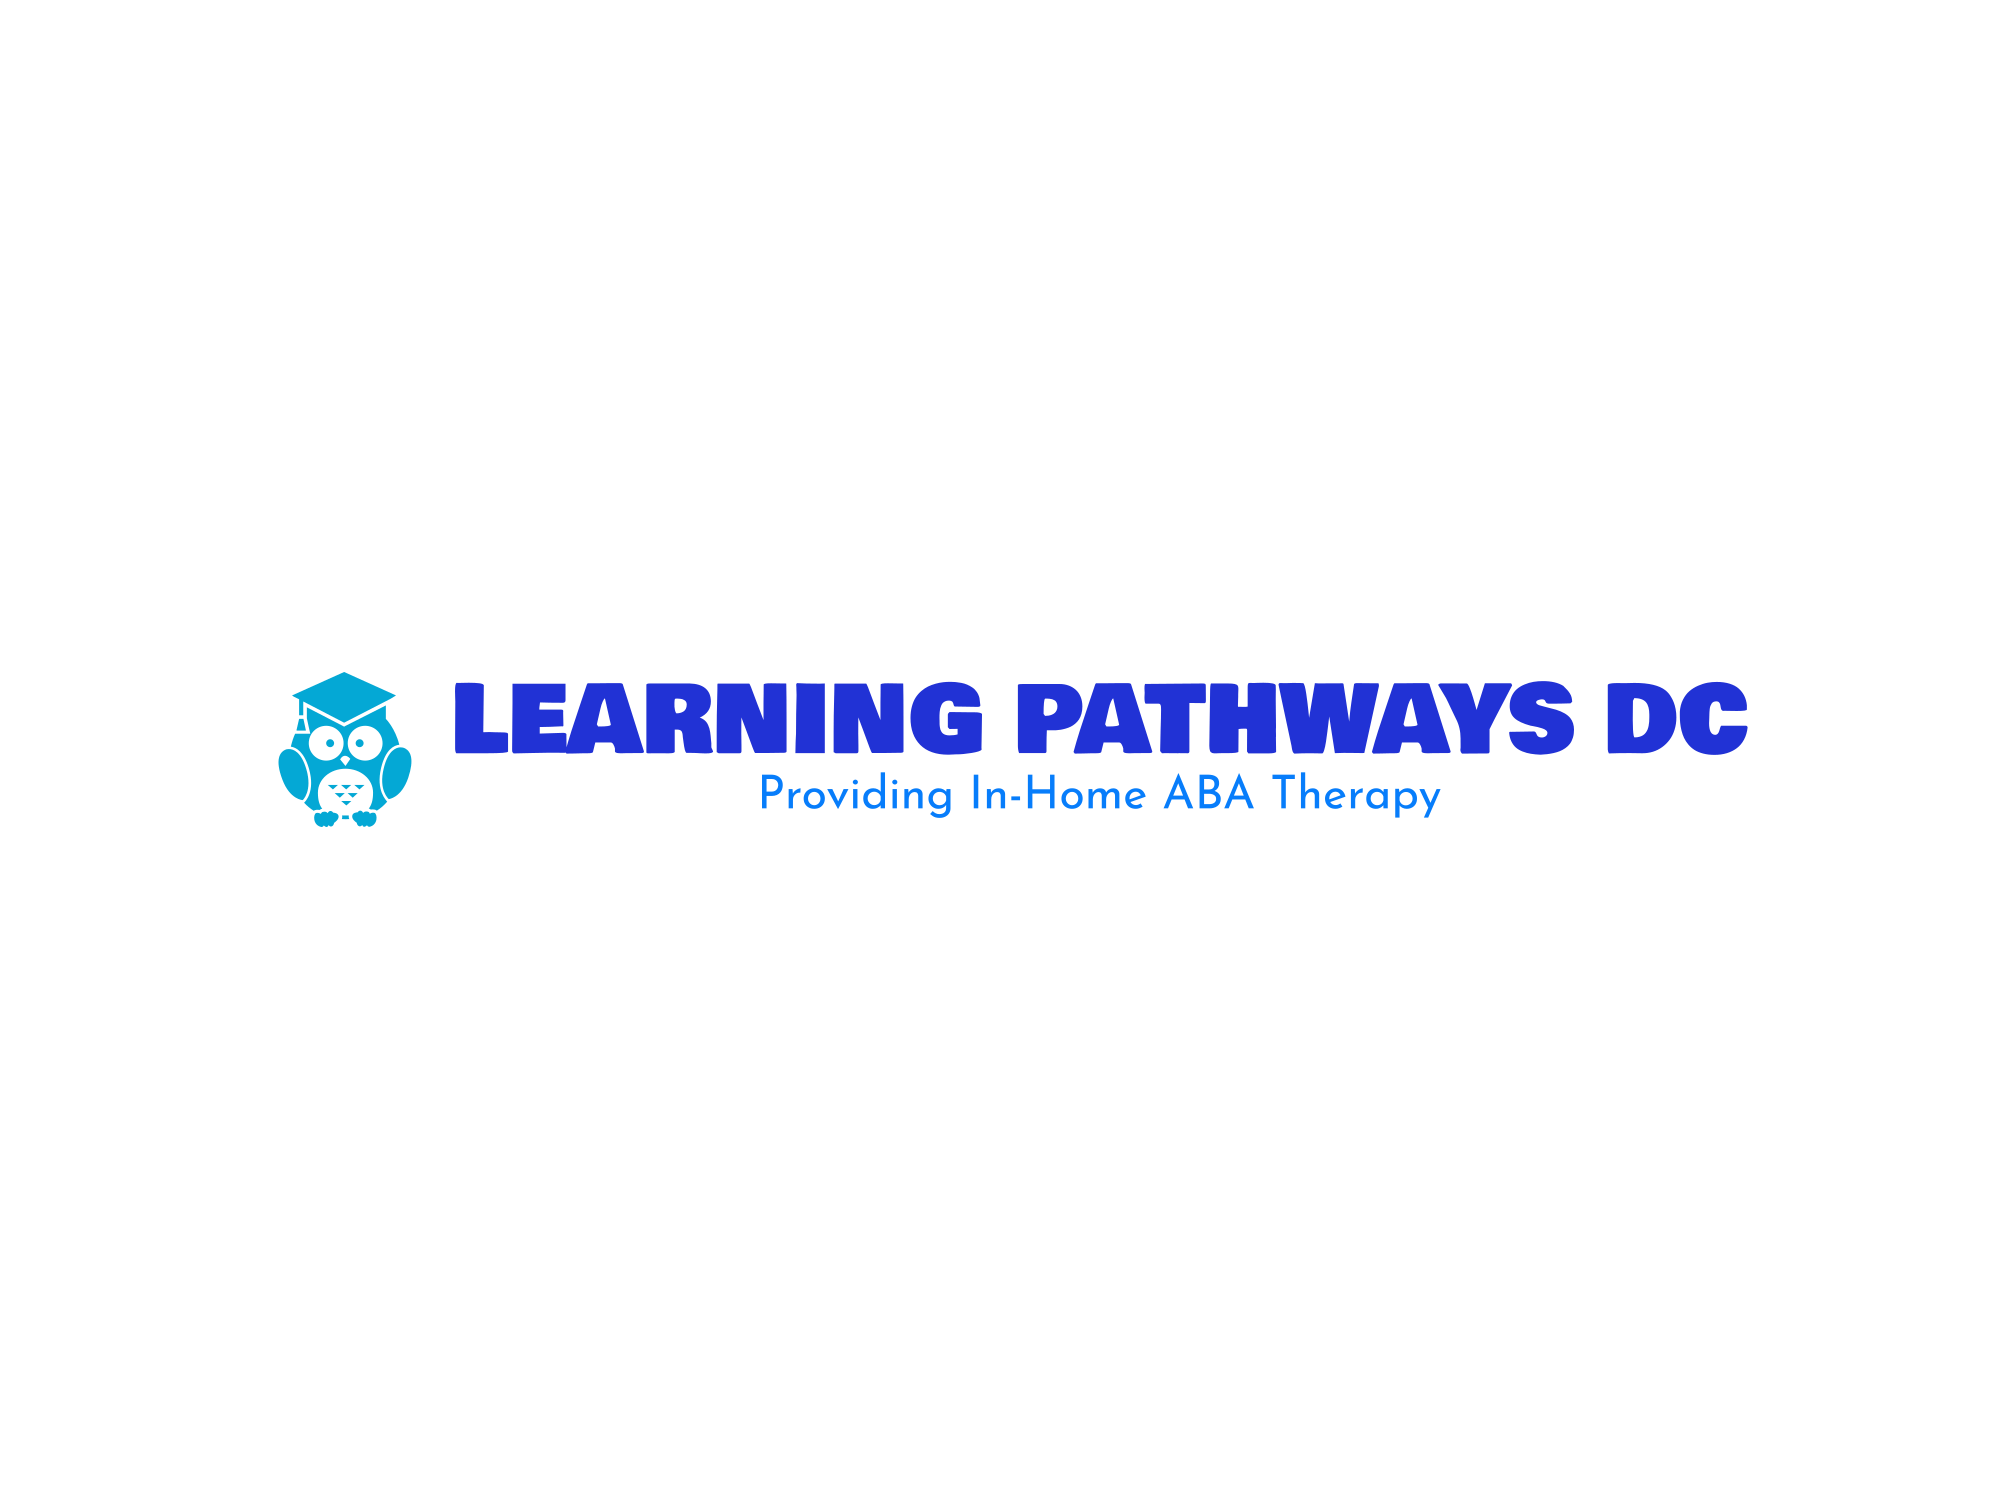 Learning Pathways DC